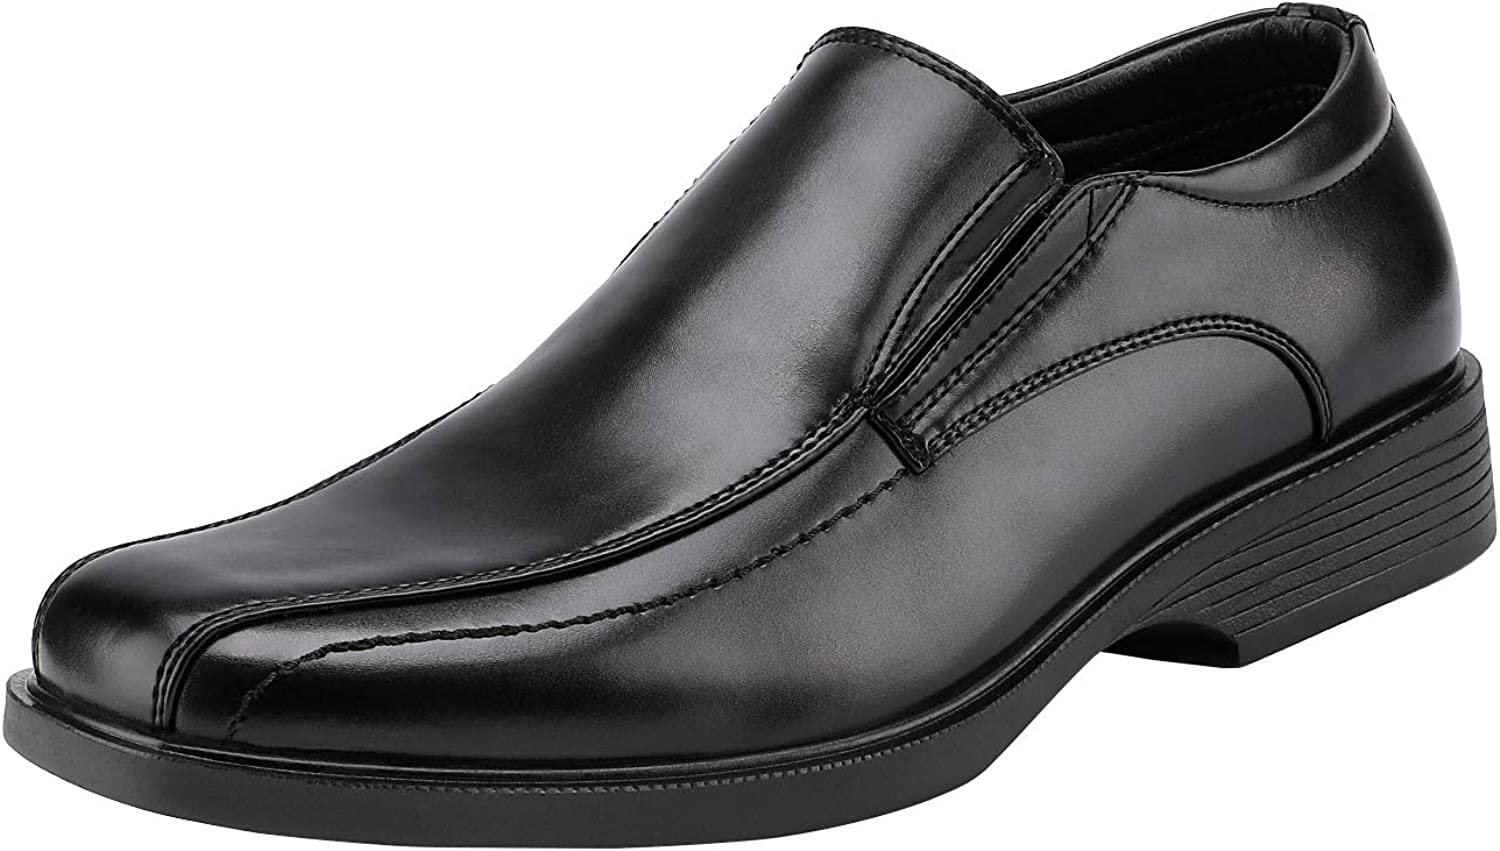 Bruno Marc Men's Leather Lined Dress Loafers Shoes